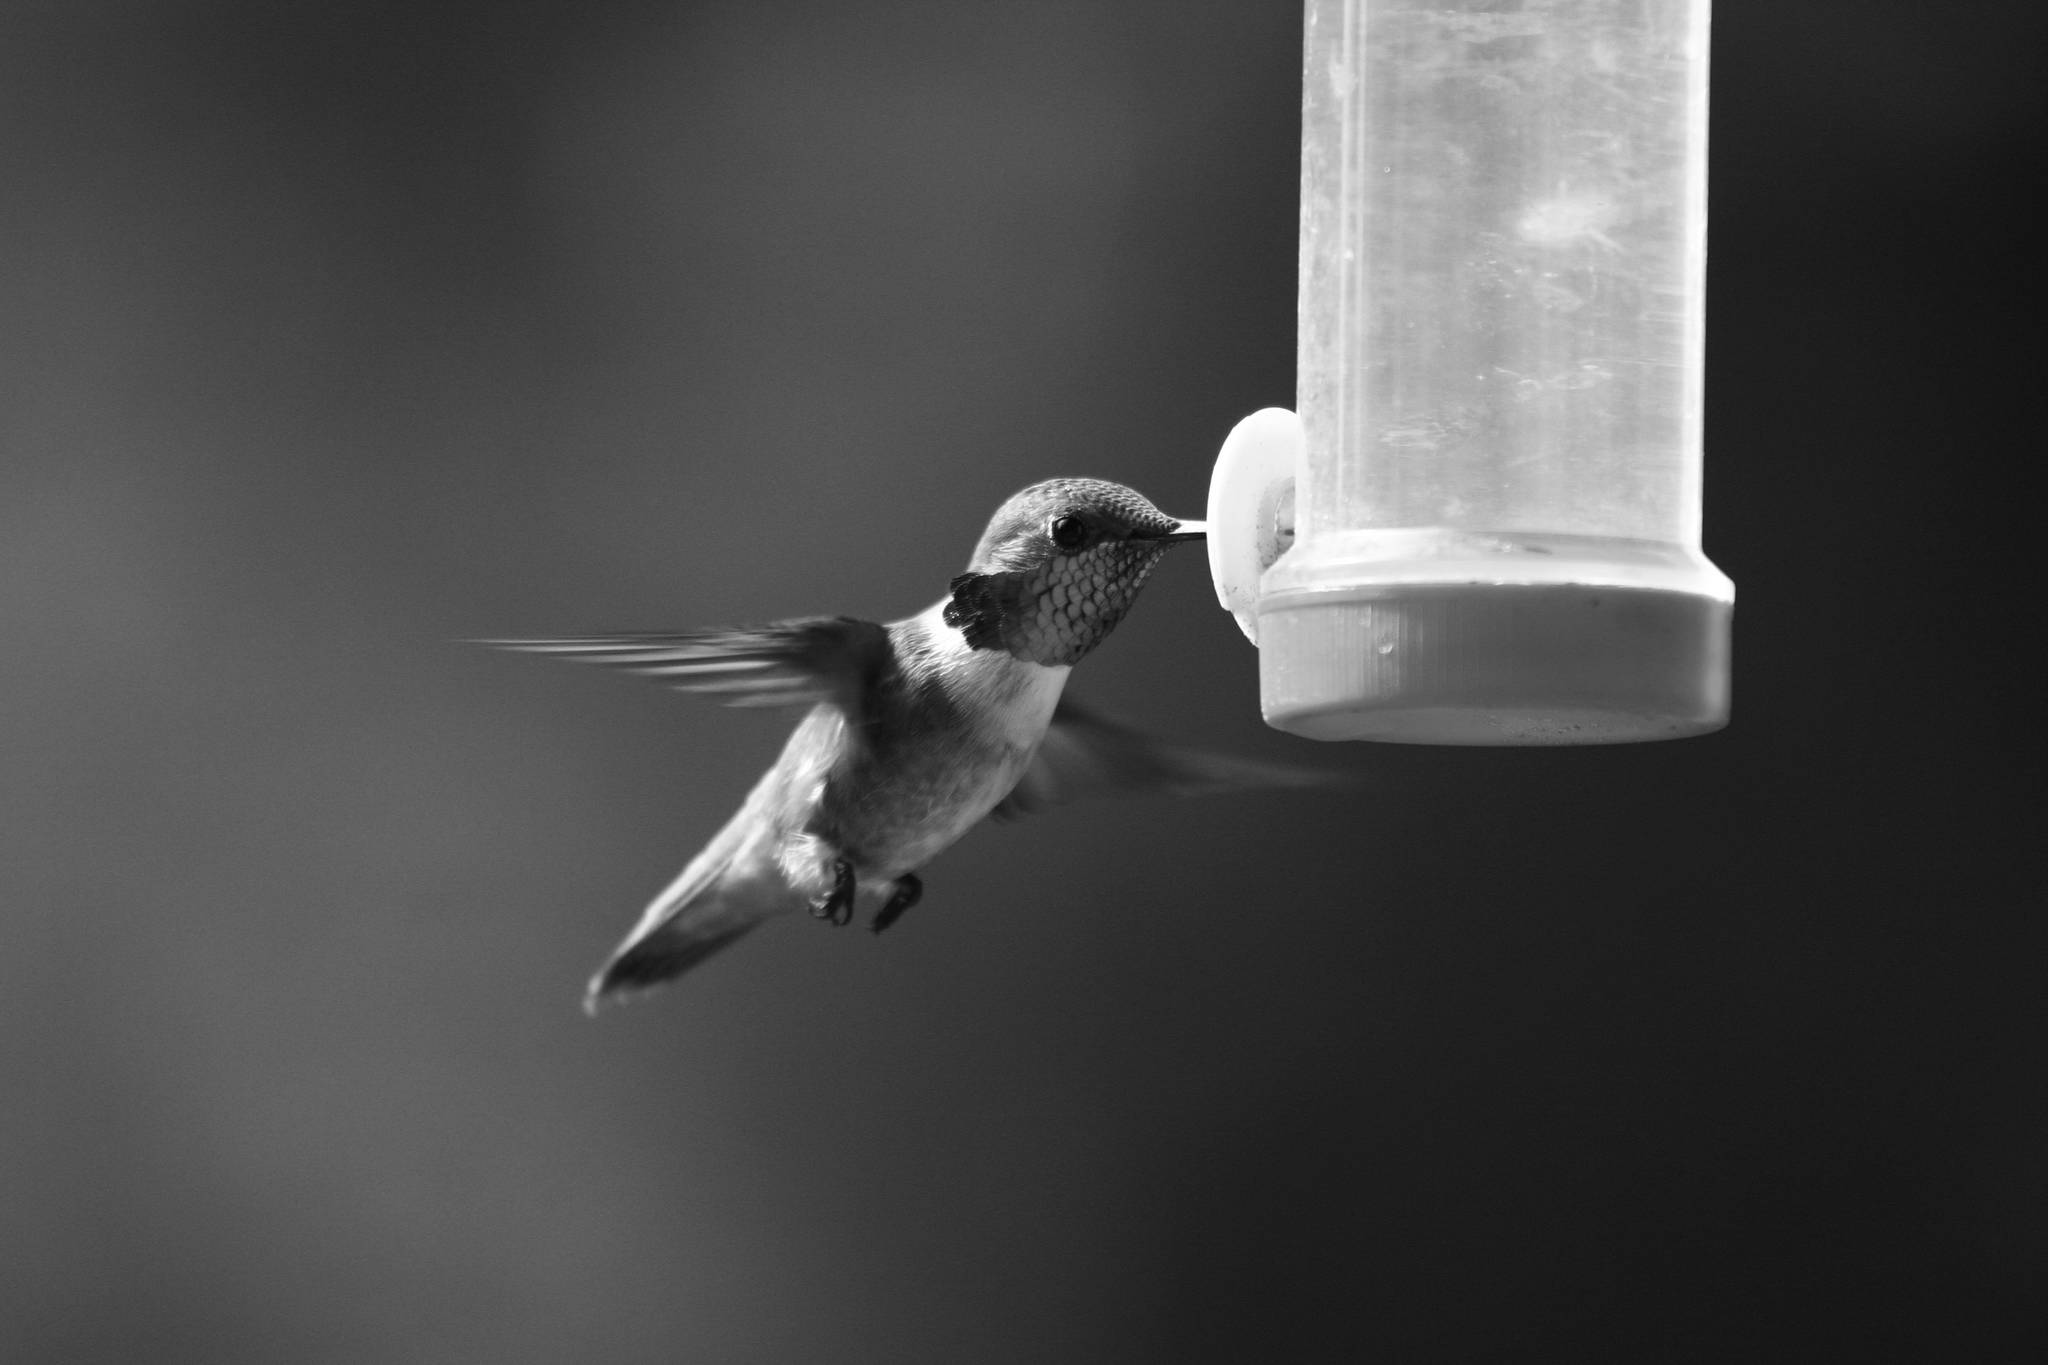 A rufous hummingbird sips nectar from a feeder in this undated photograph. (Photo by Carla Stanley)